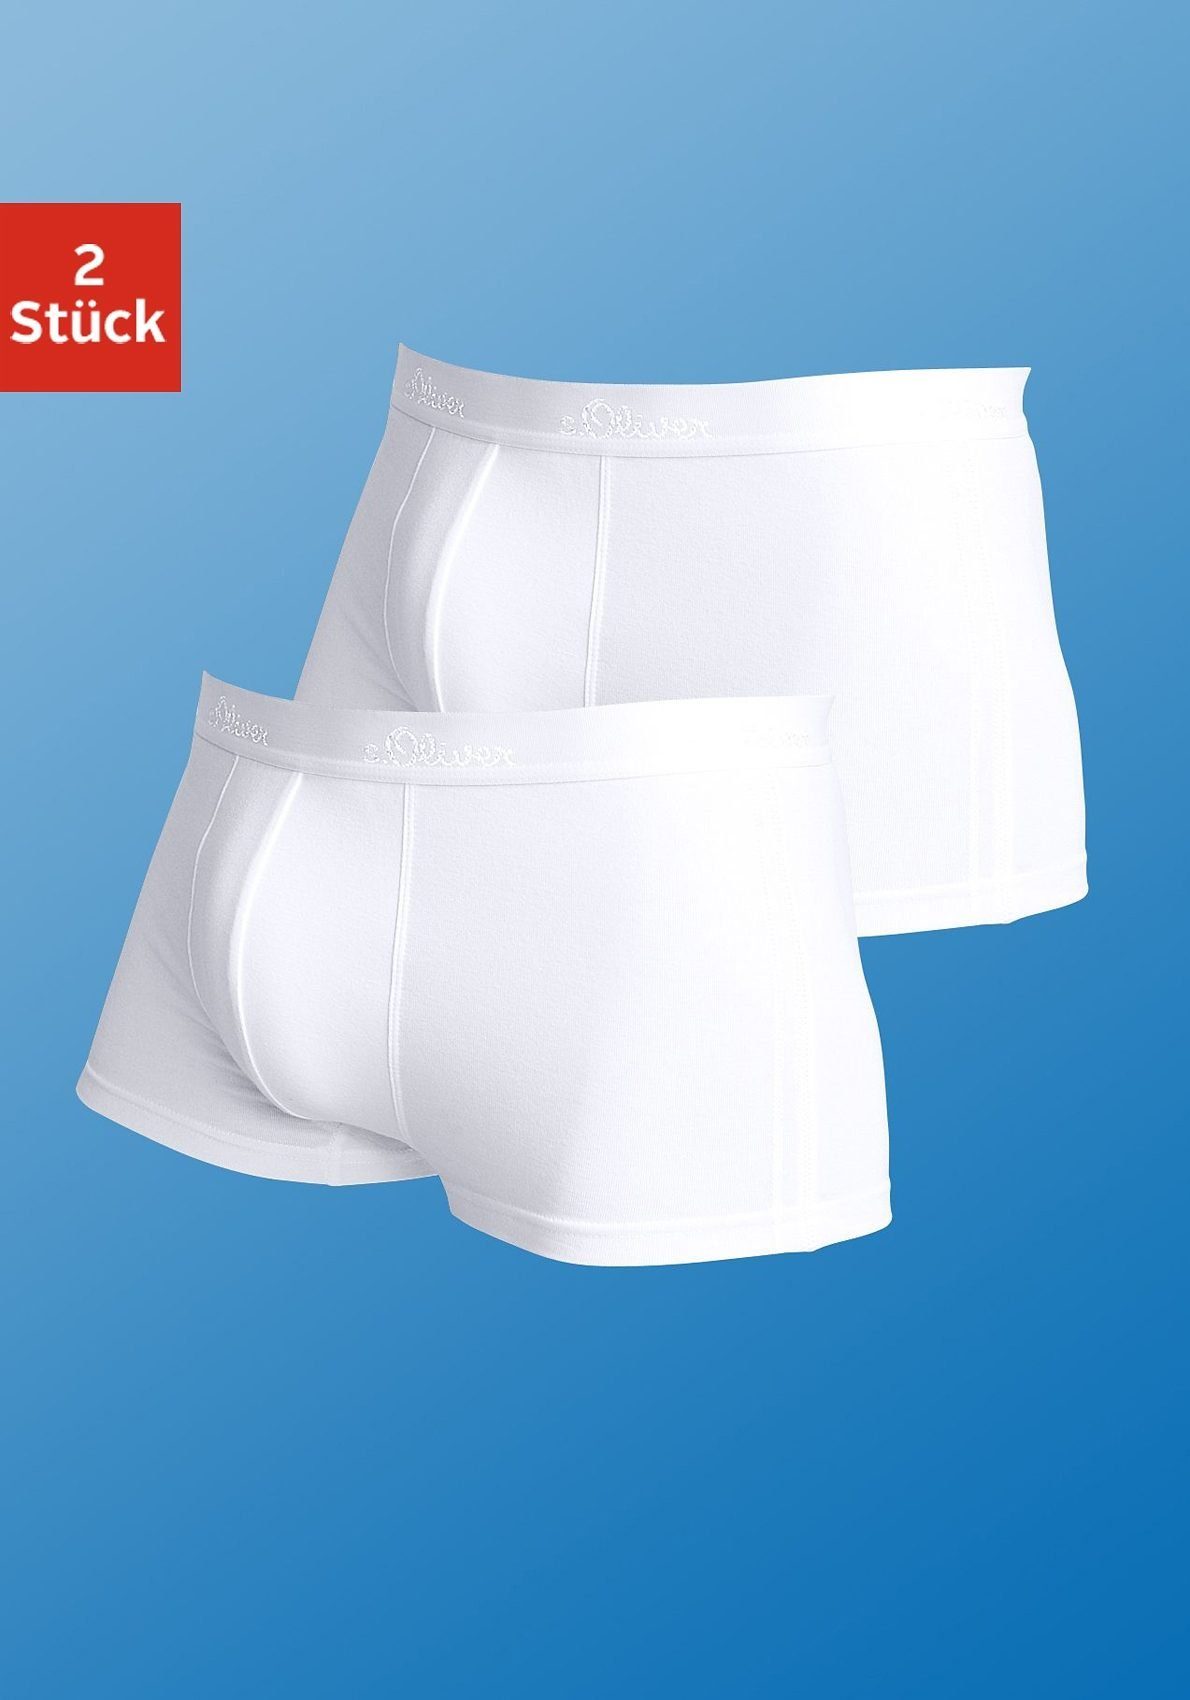 aus 2-St) in (Packung, Modal Boxershorts Hipster-Form weichem s.Oliver